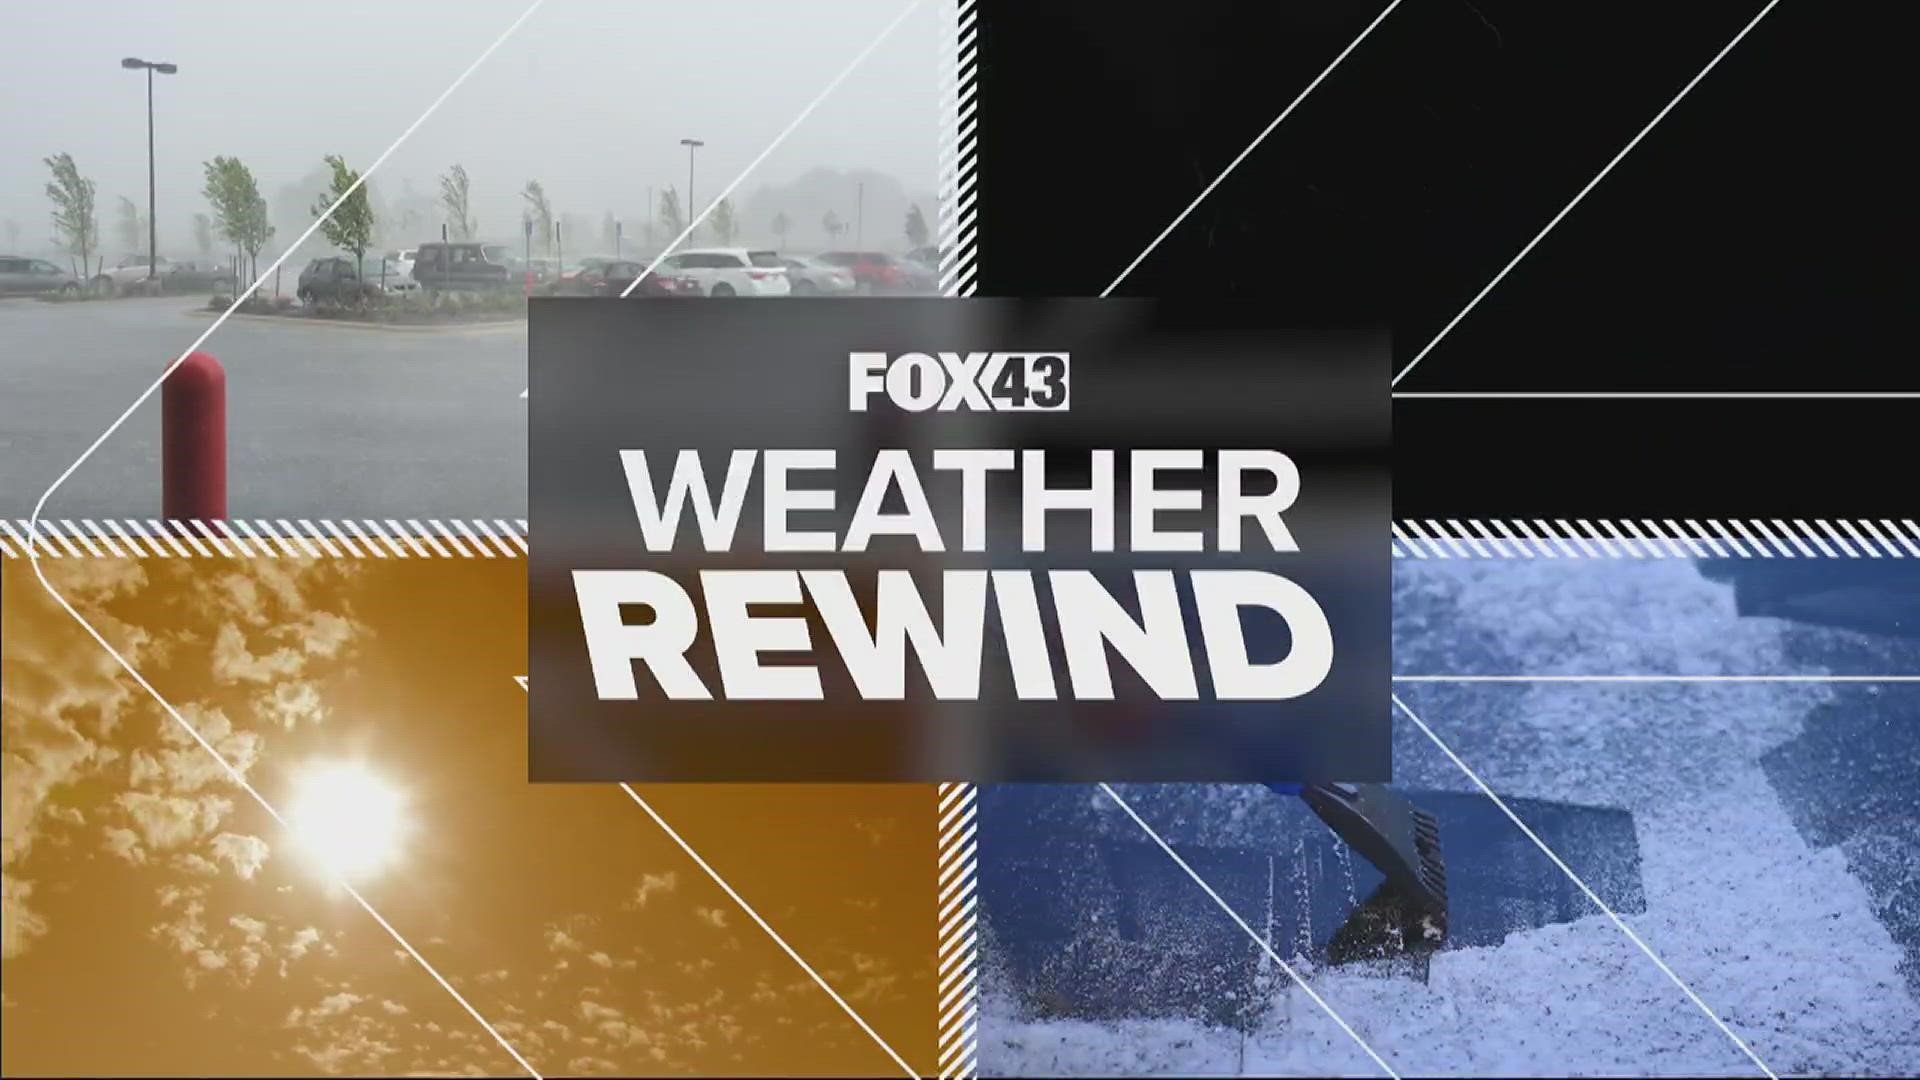 At first glance, it might seem strange to research severe weather in the winter. We rewind back and talk about February severe weather in the south & in central Pa.!